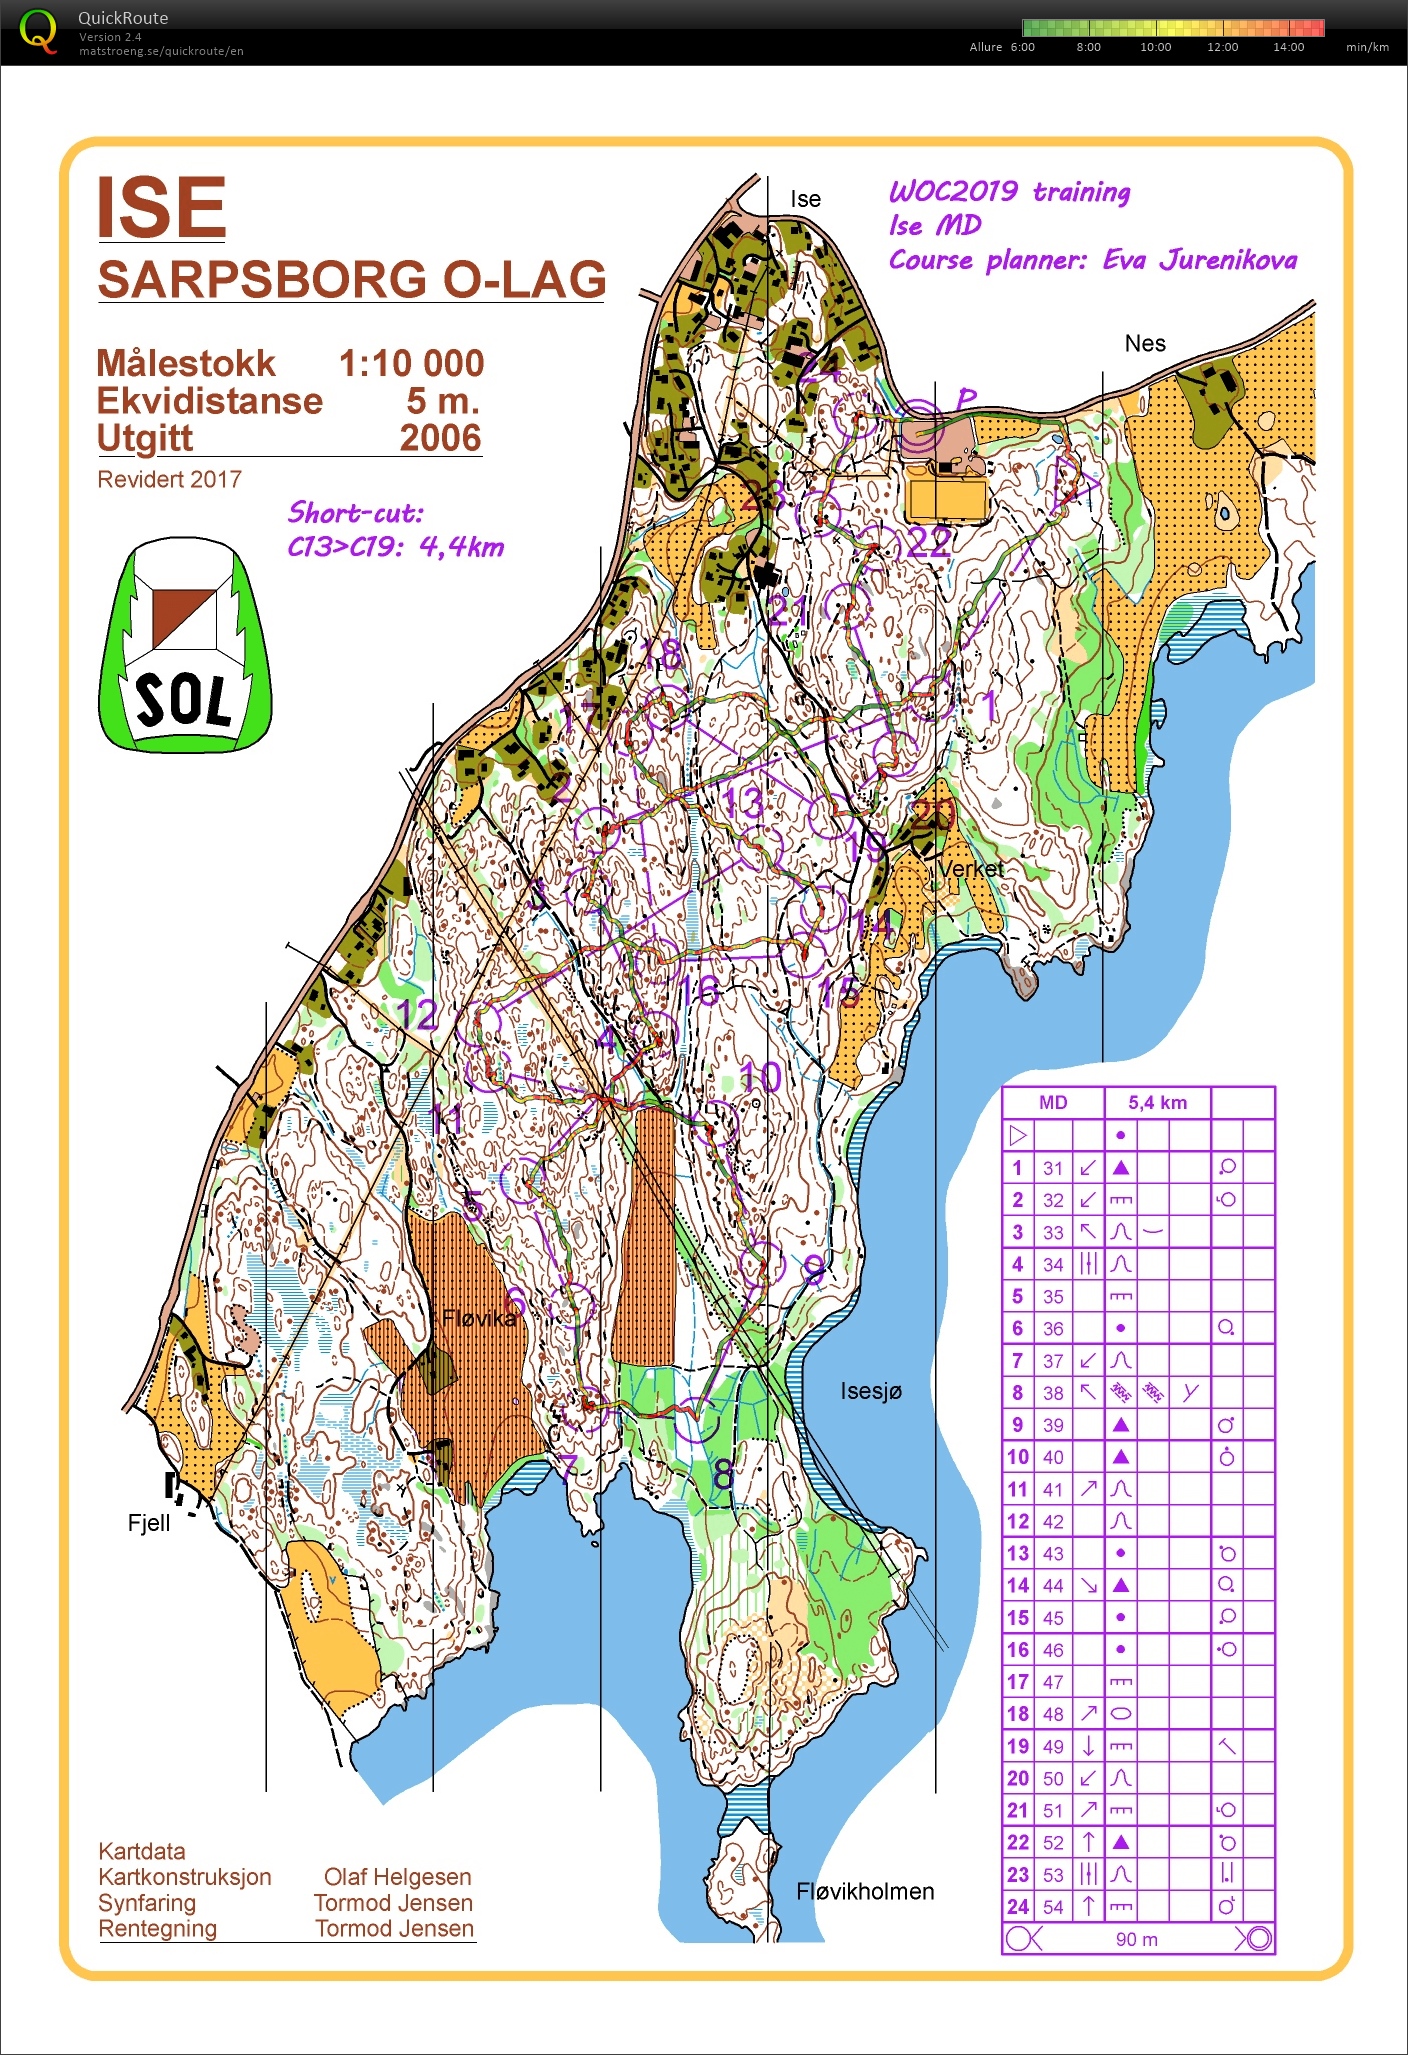 WOC 2019 training package /// pose MD Ise (13.06.2018)